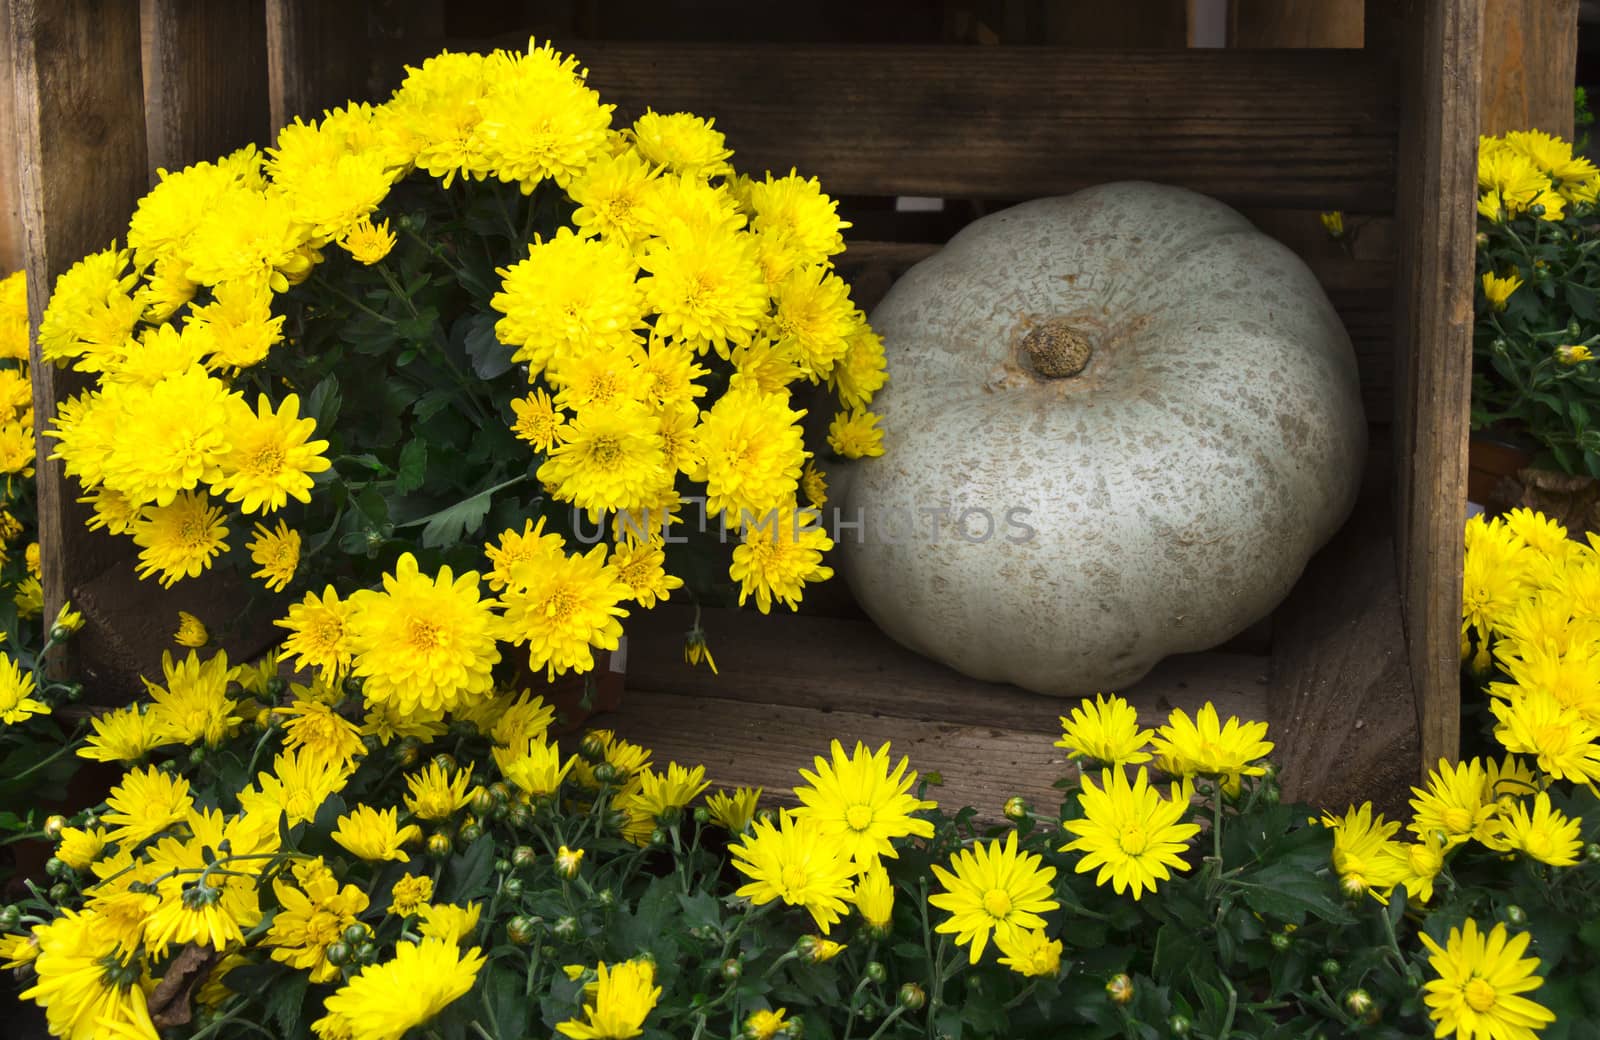 Flowers and pumpkin decoration  by snowwhite